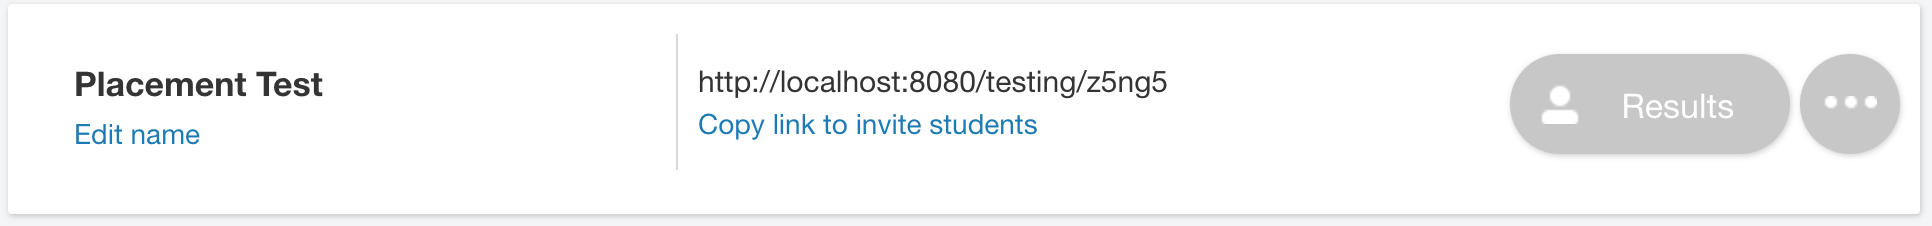 List of tests showing option to copy a link to invite students to take the test.